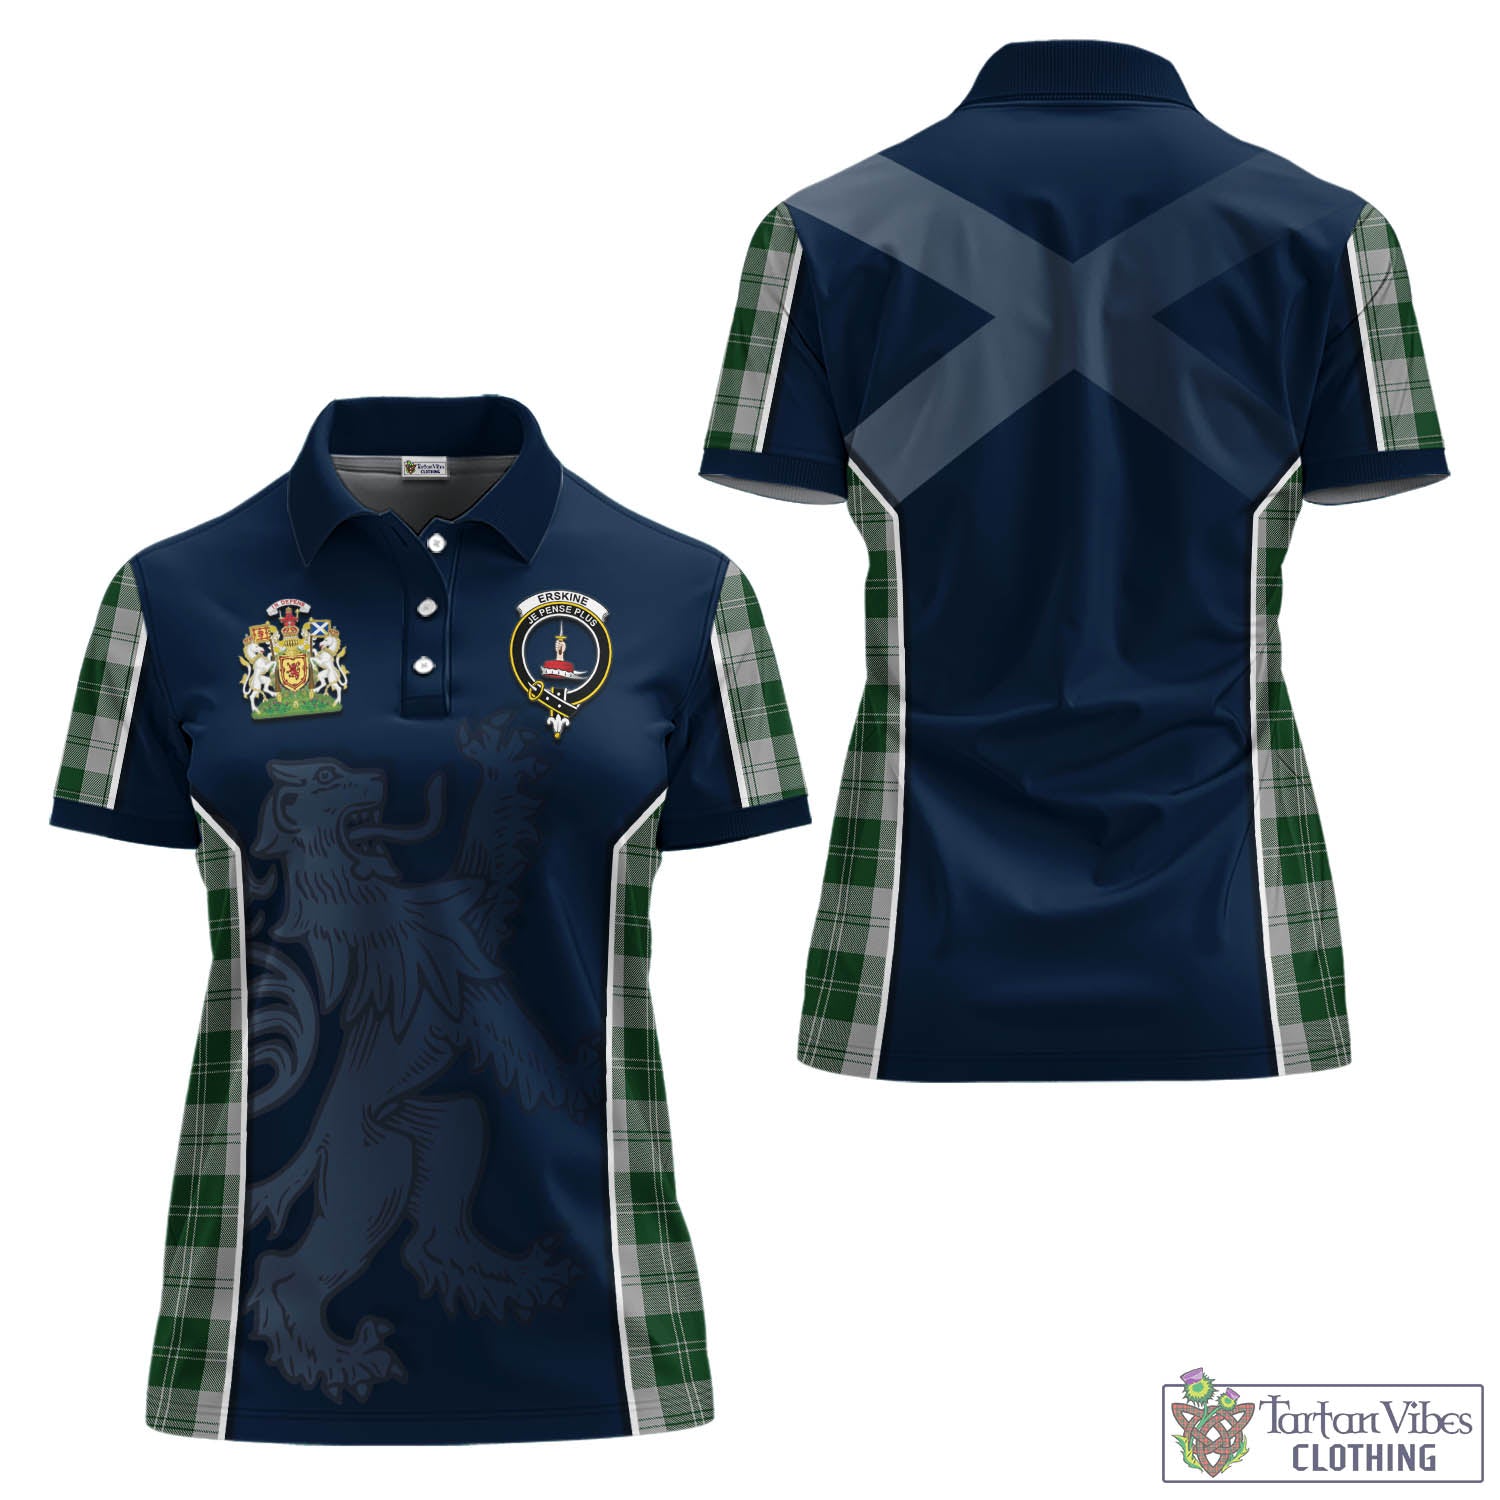 Tartan Vibes Clothing Erskine Green Tartan Women's Polo Shirt with Family Crest and Lion Rampant Vibes Sport Style